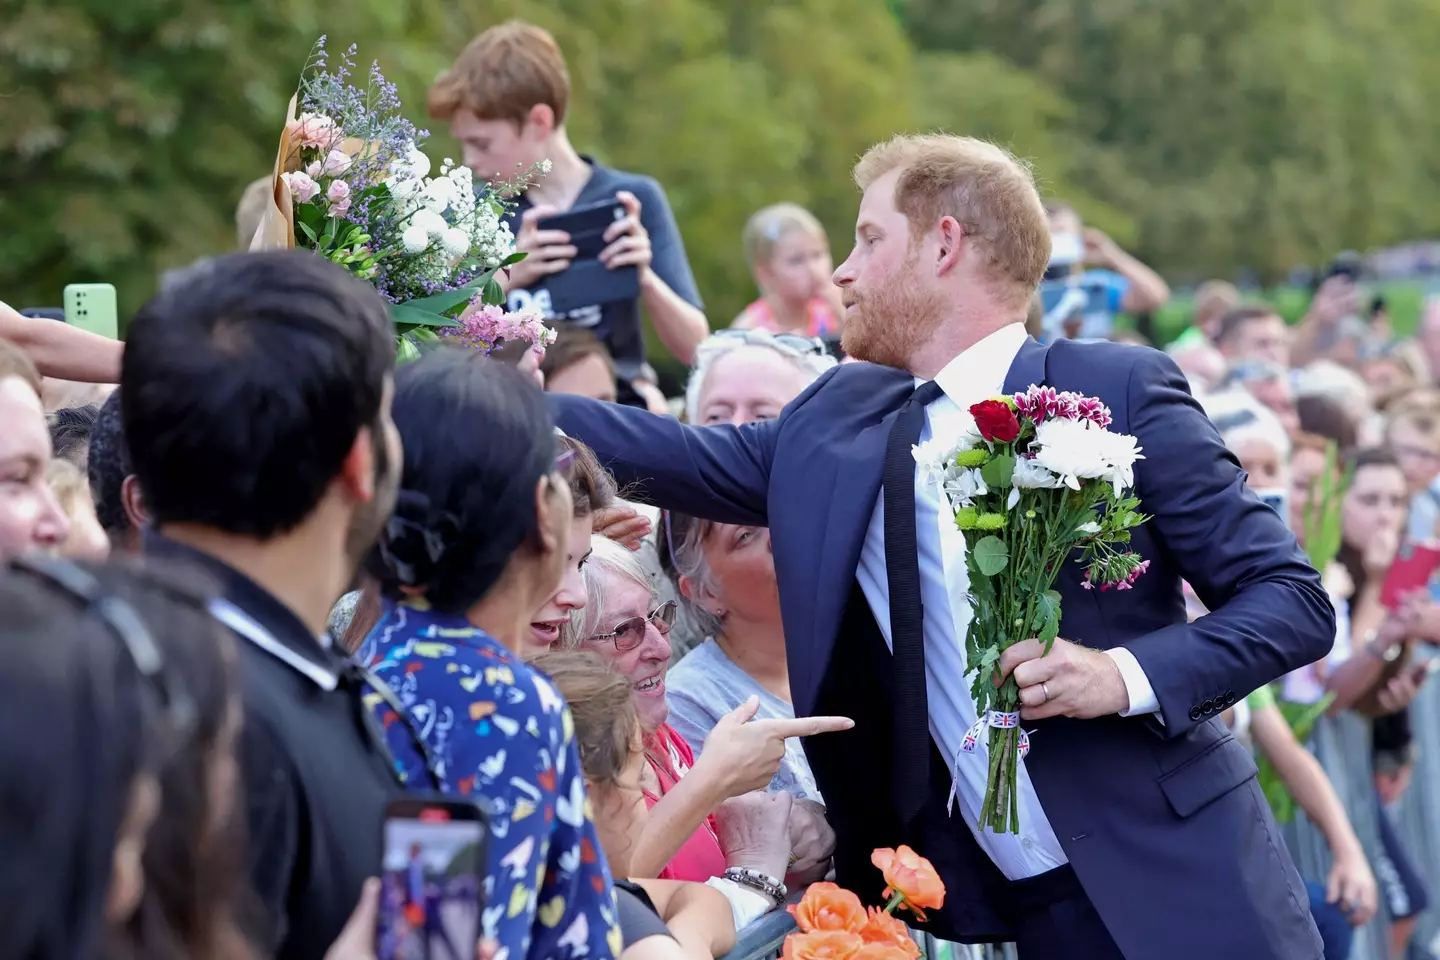 Harry can be seen collecting flowers from well wishers while greeting members of the public on Saturday evening in Windsor.